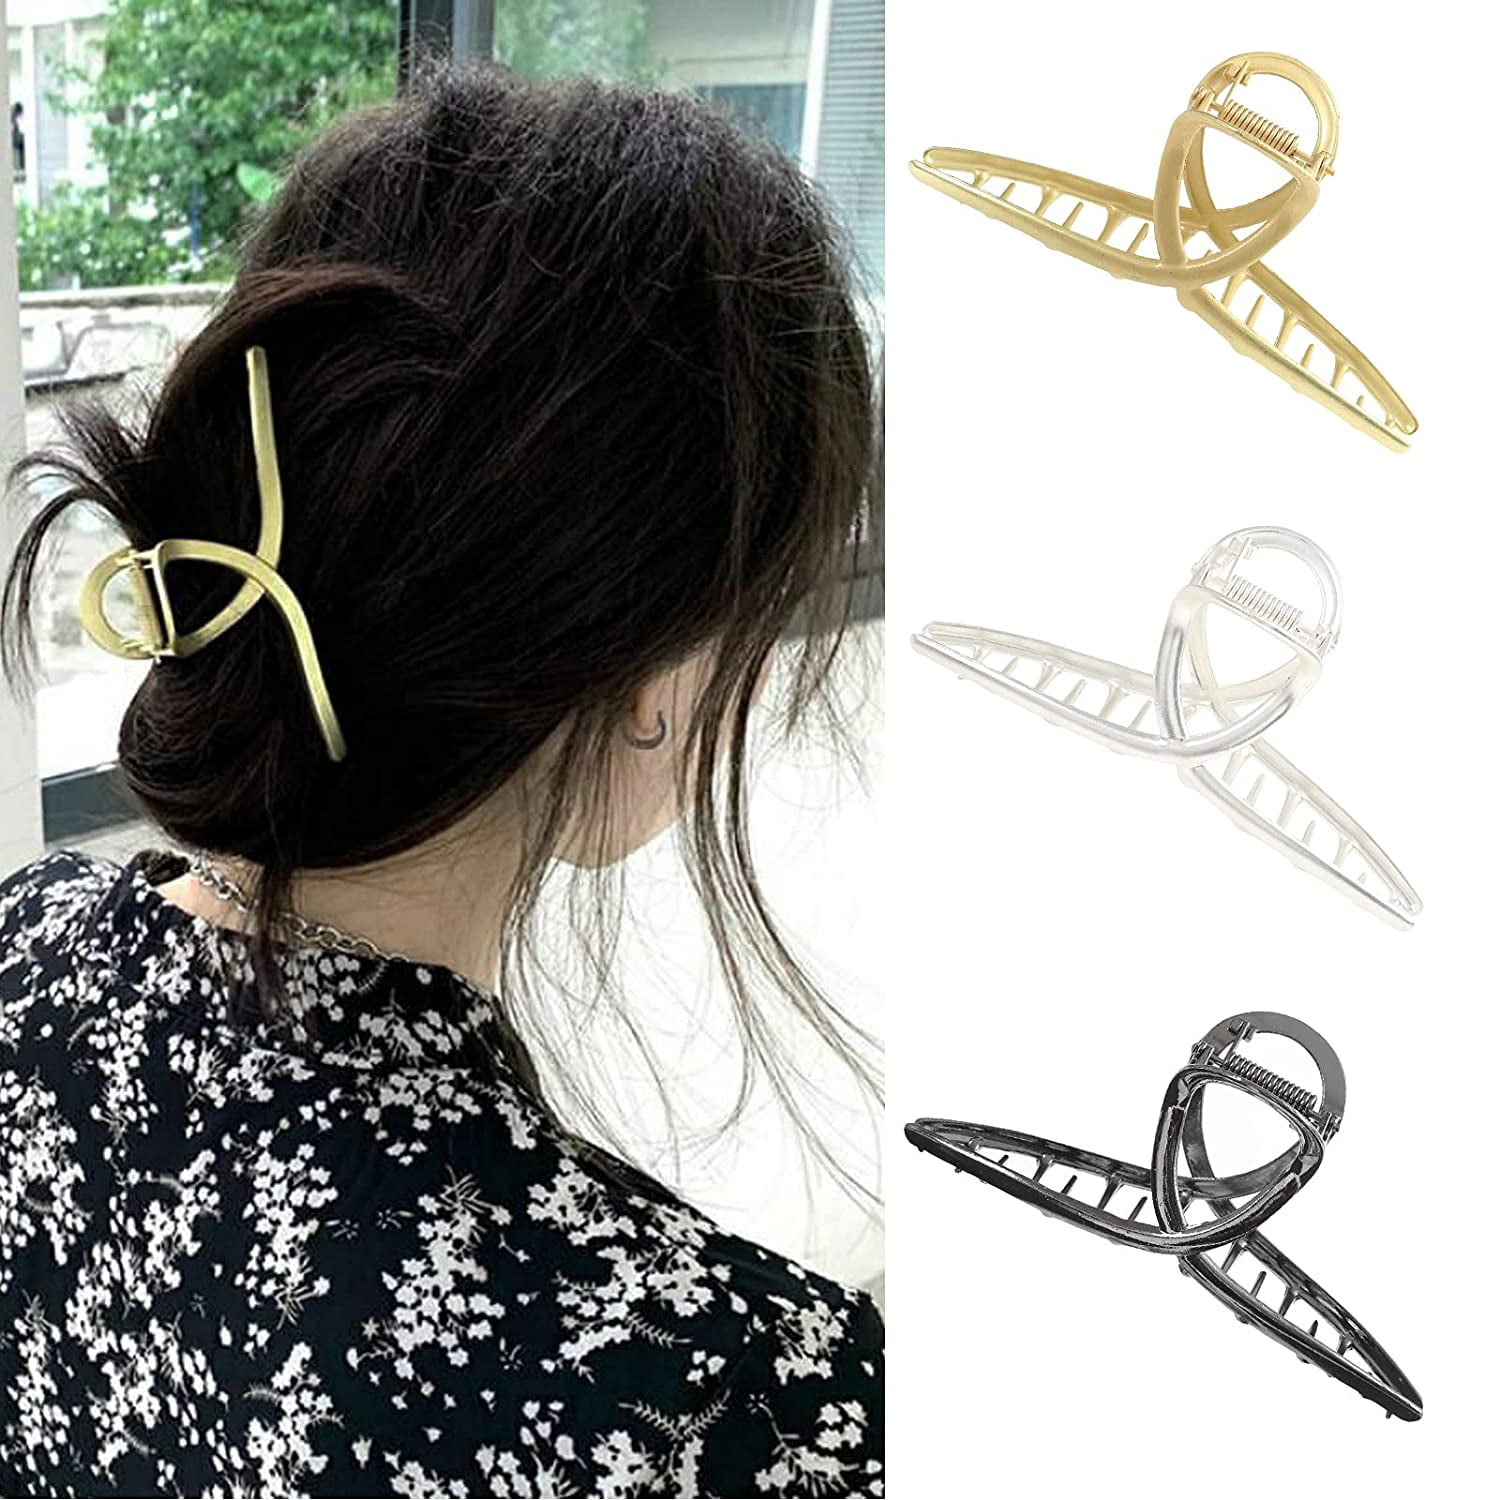 1.57 inch Small Acrylic Hair Claw Clips for Girls and Women Marbling Hair  Clips,Plastic No-Slip Grip Jaw Hair Clip Hair Jaw Clamp,Pack of 12